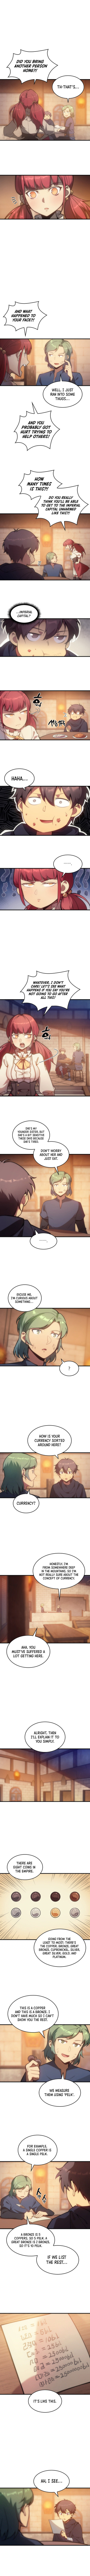 My Civil Servant Life Reborn in the Strange World - Chapter 5 Page 4